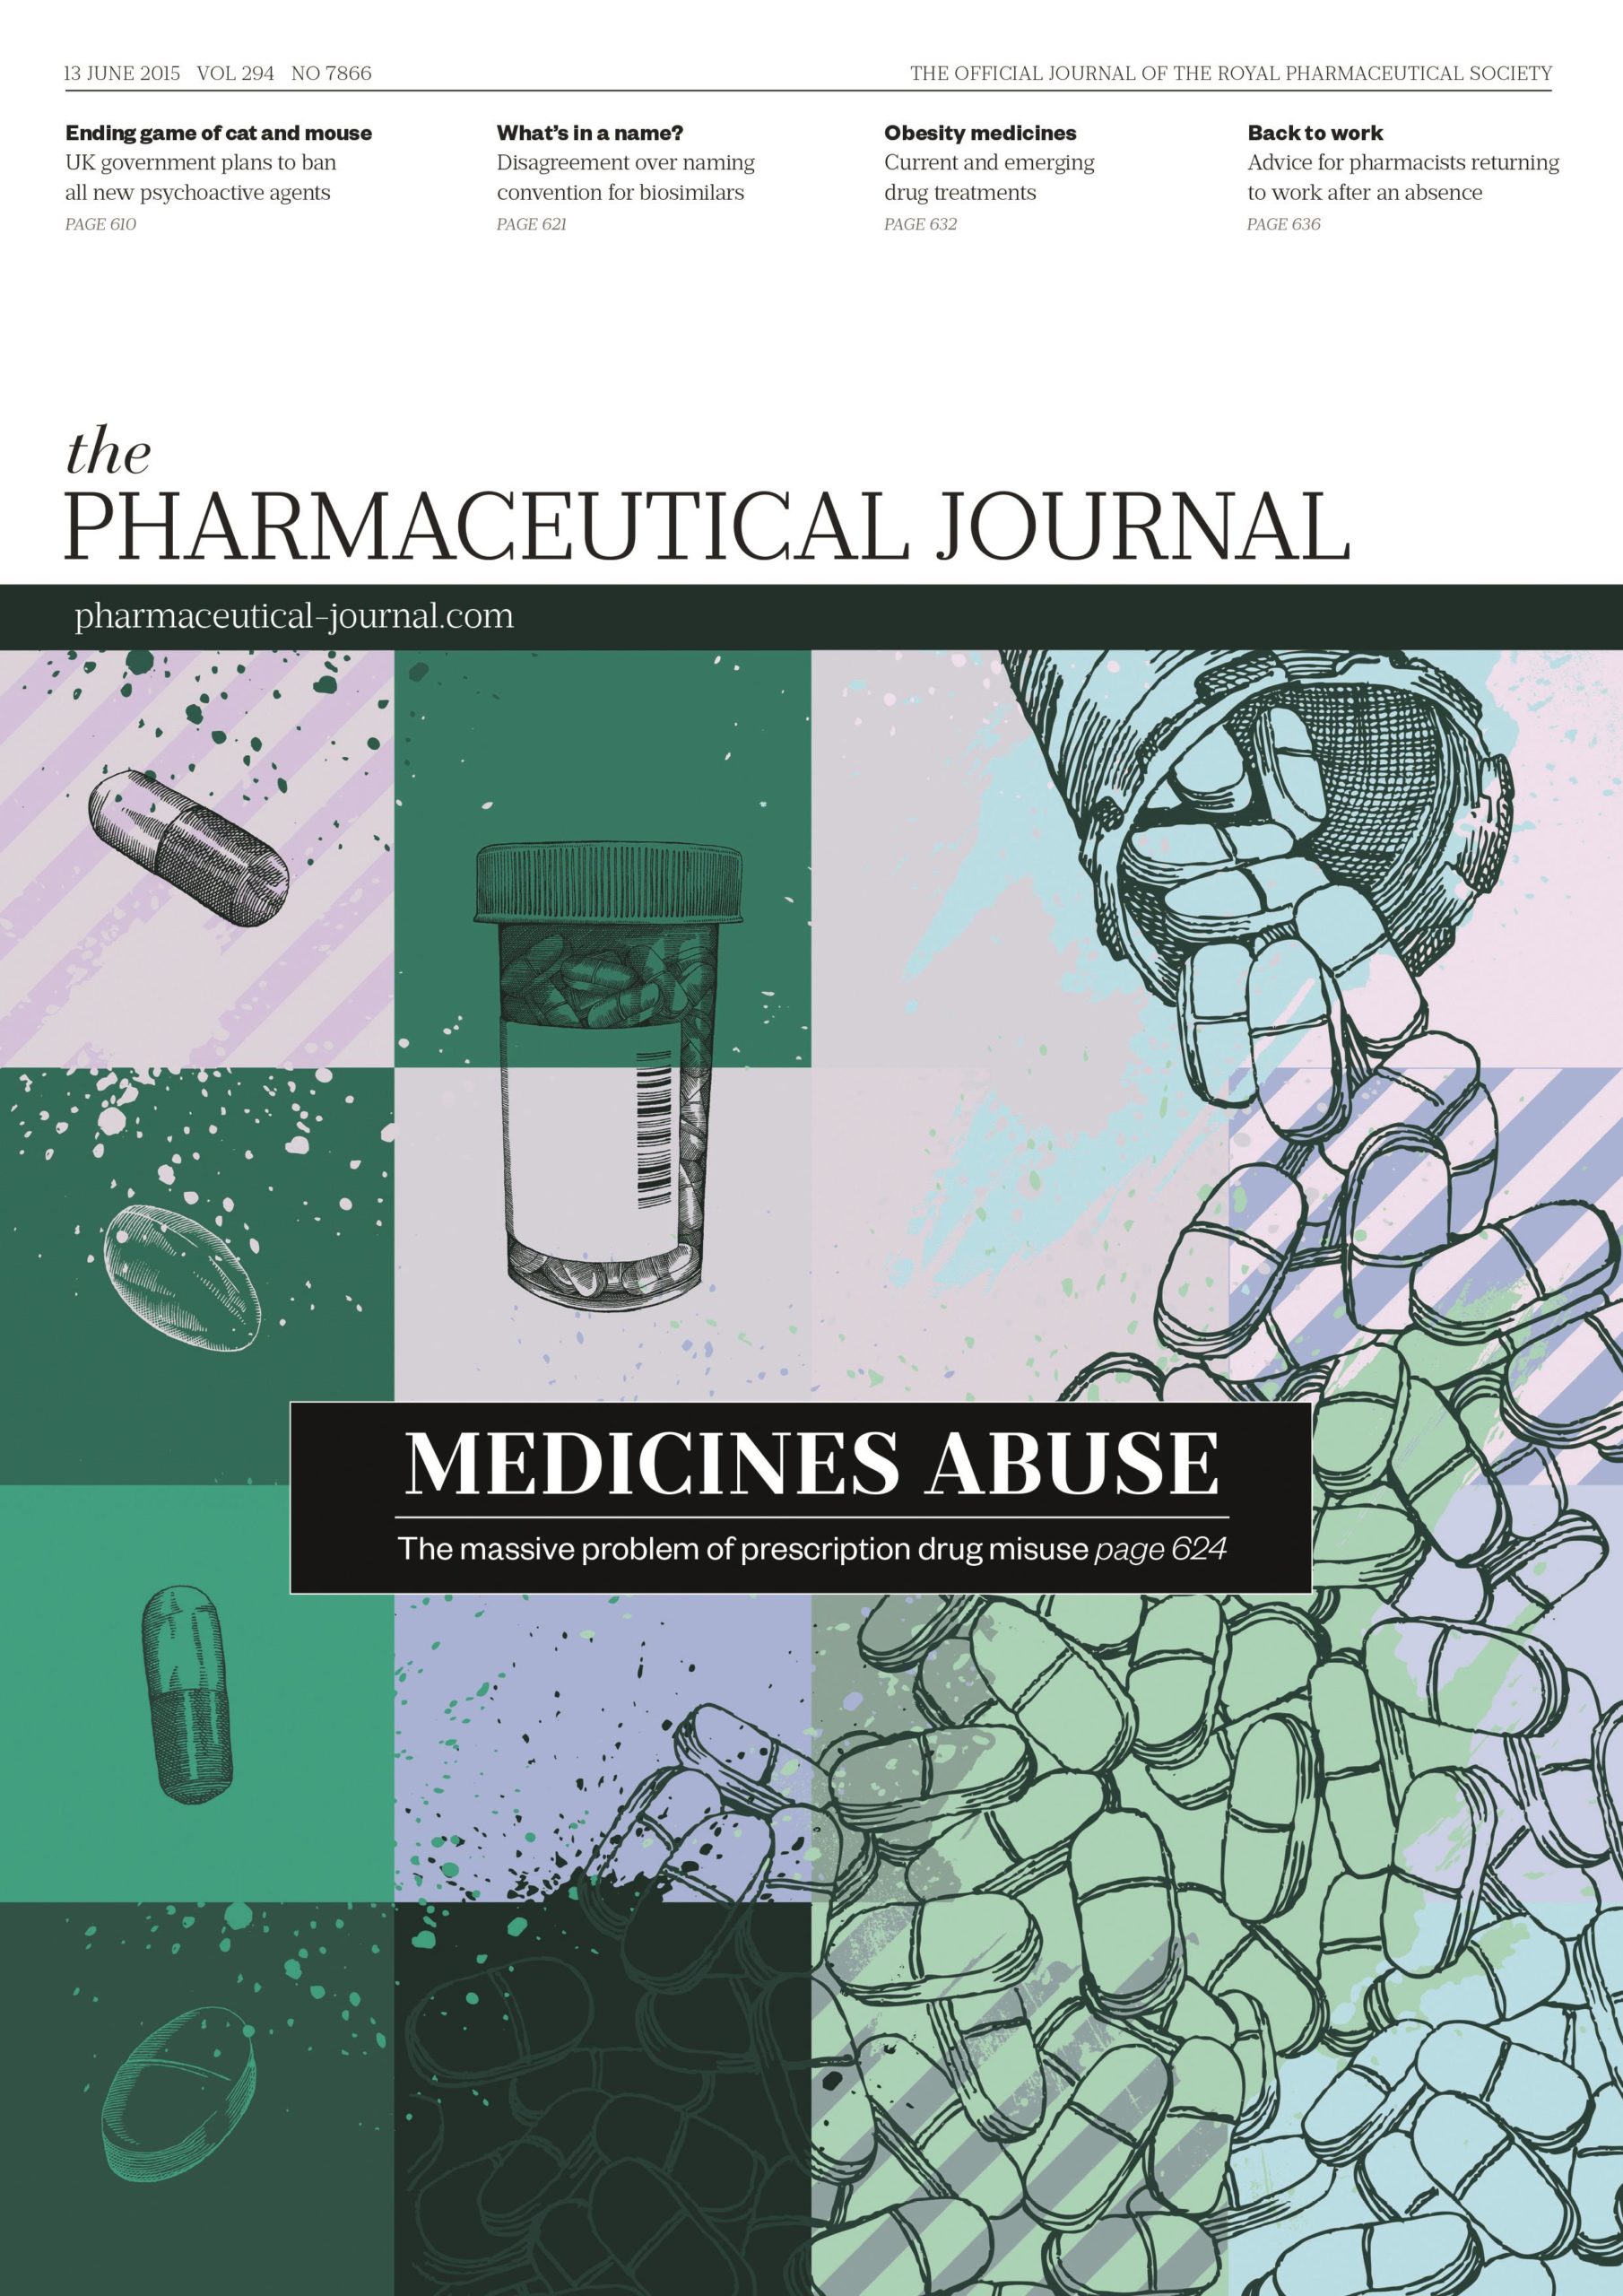 Publication issue cover for PJ, 13 June 2015, Vol 294, No 7866